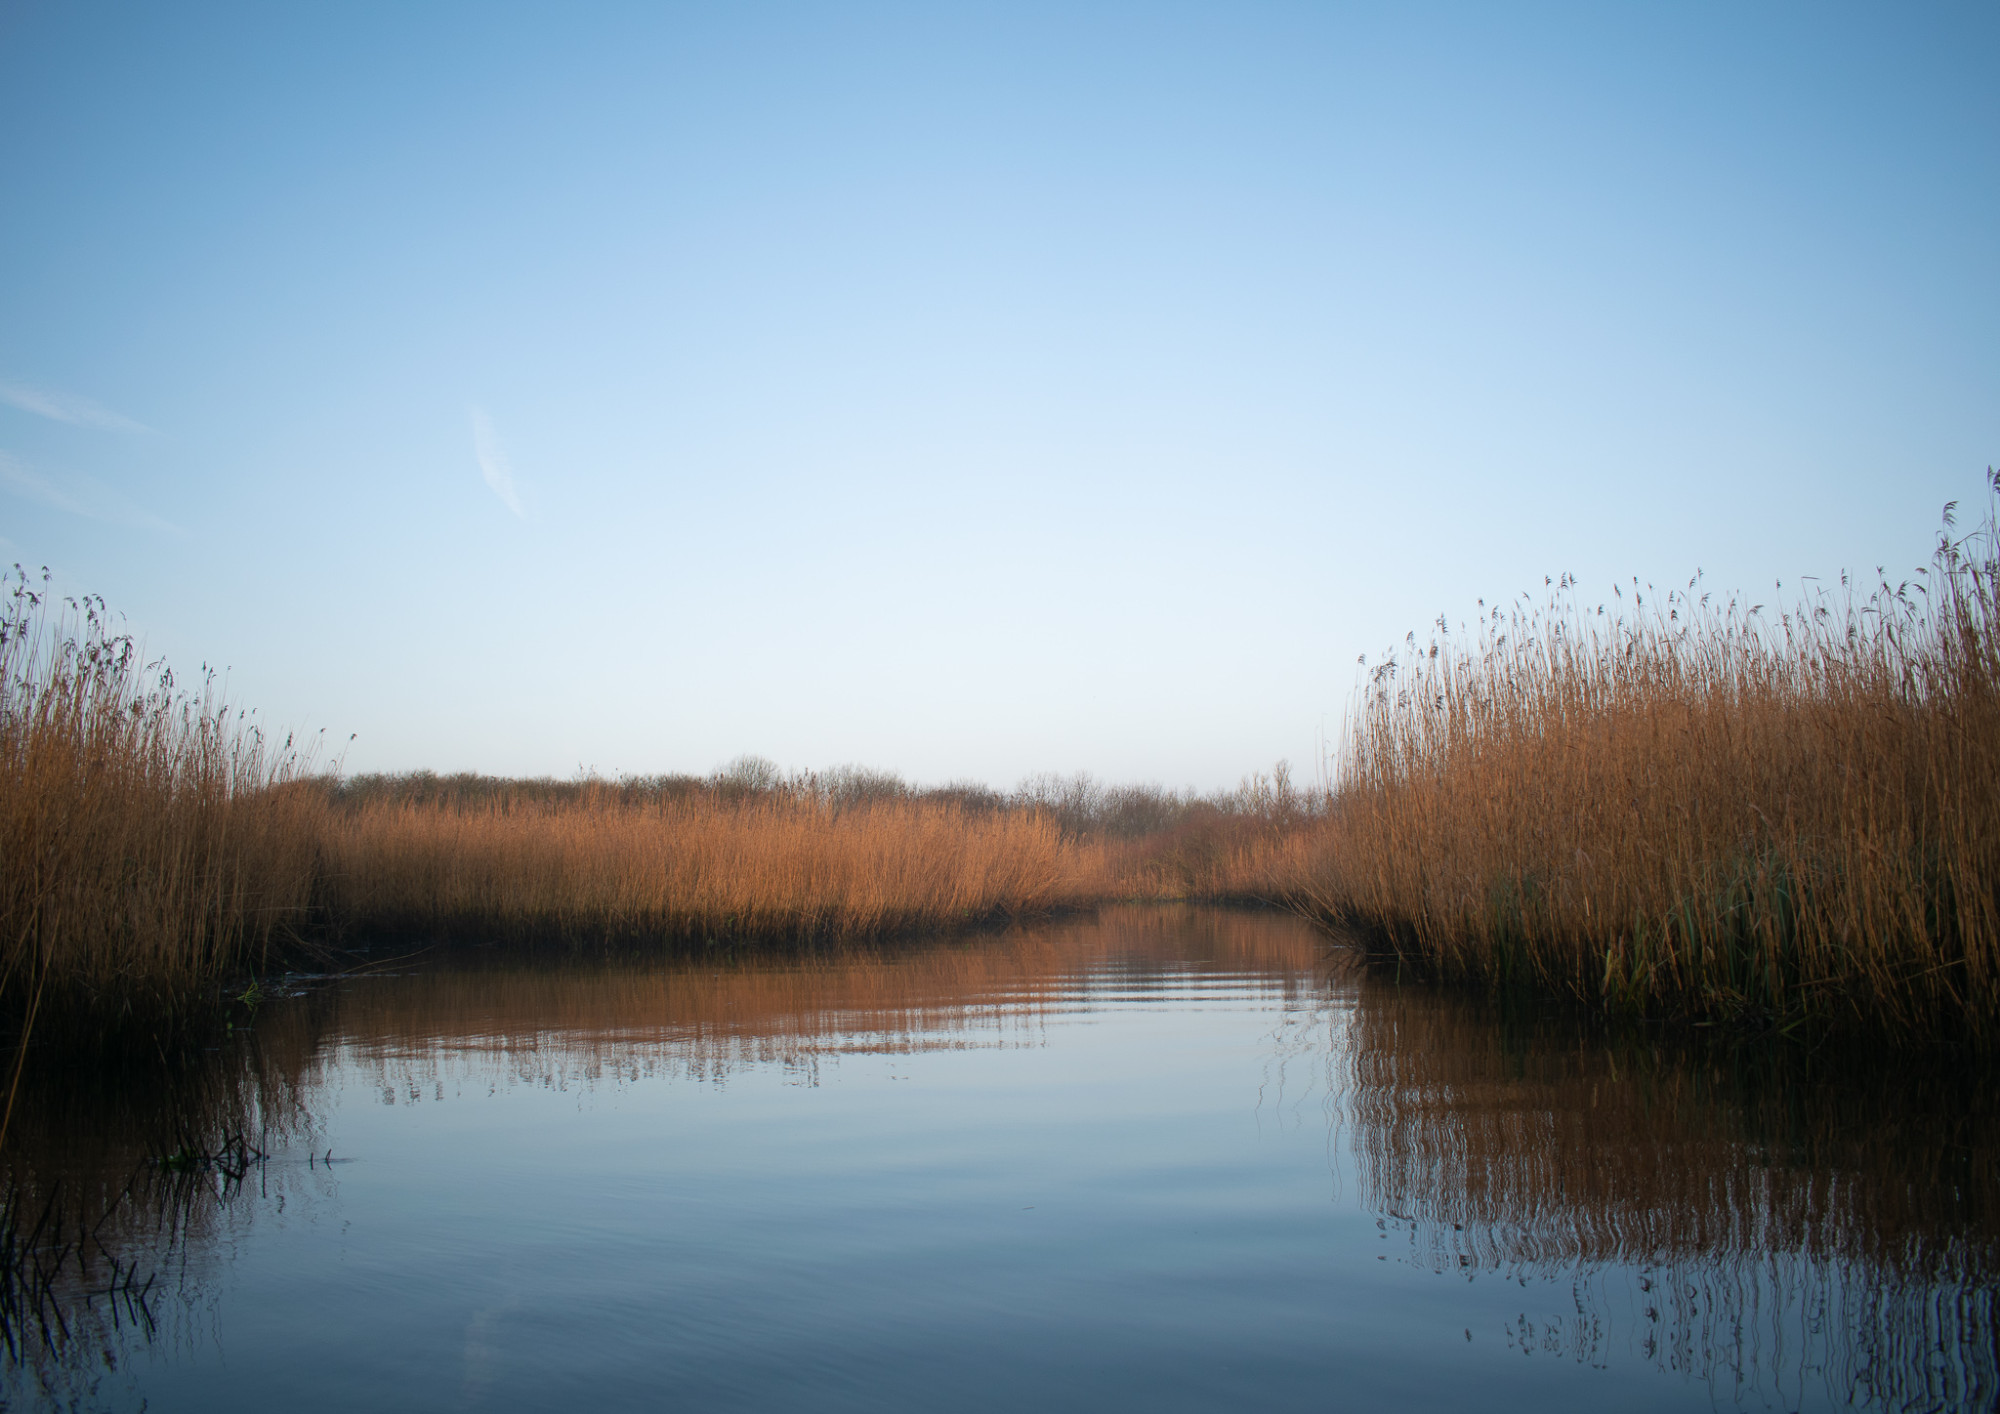 Surlingham Broad. This photo was taken while rowing through the reeds just after sunrise on Surlingham Broad.